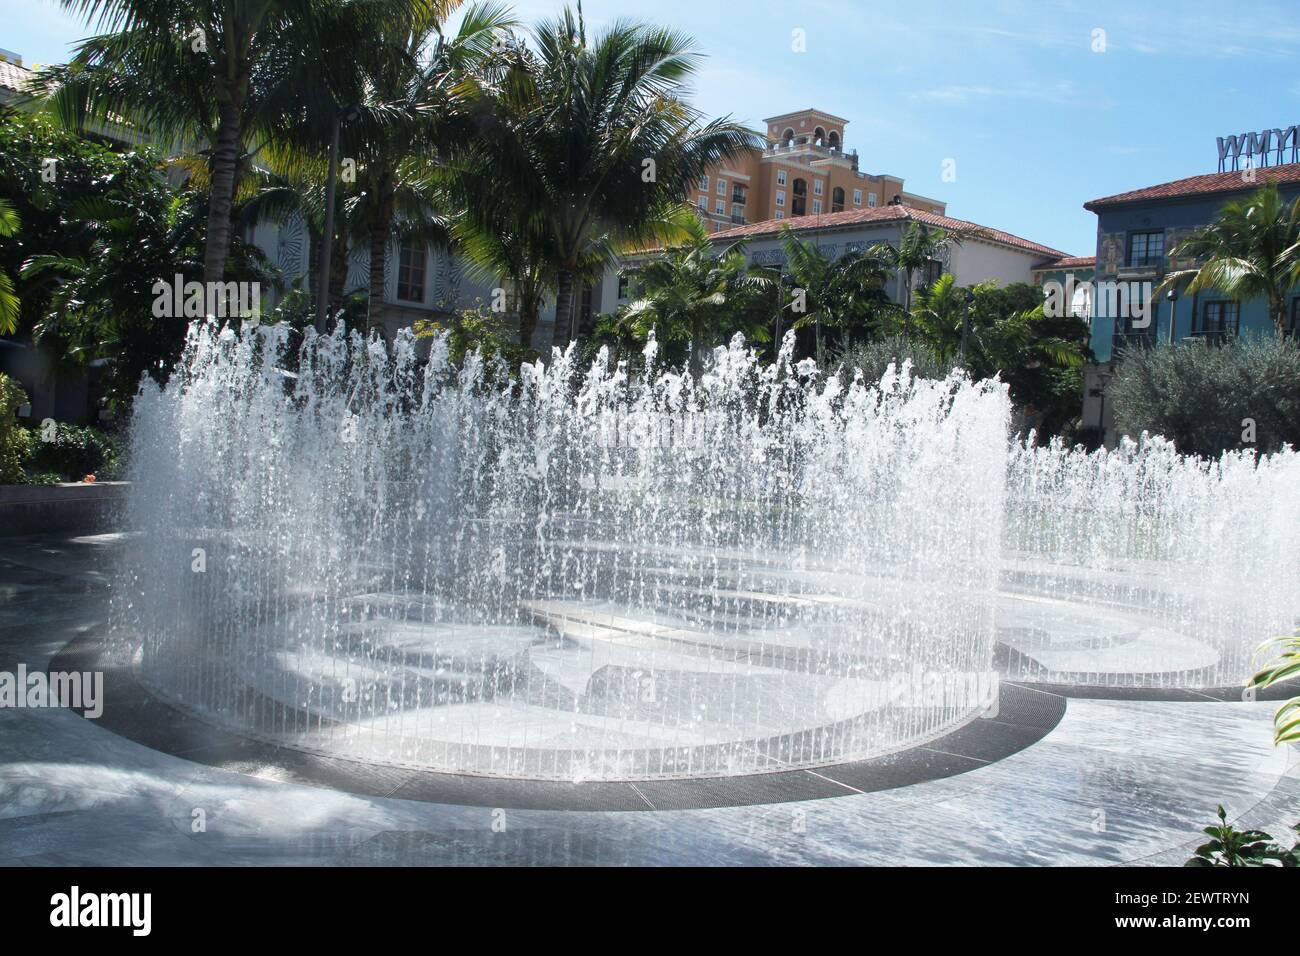 Water fountains in Rosemary Square, Palm Beach, FL, USA Stock Photo